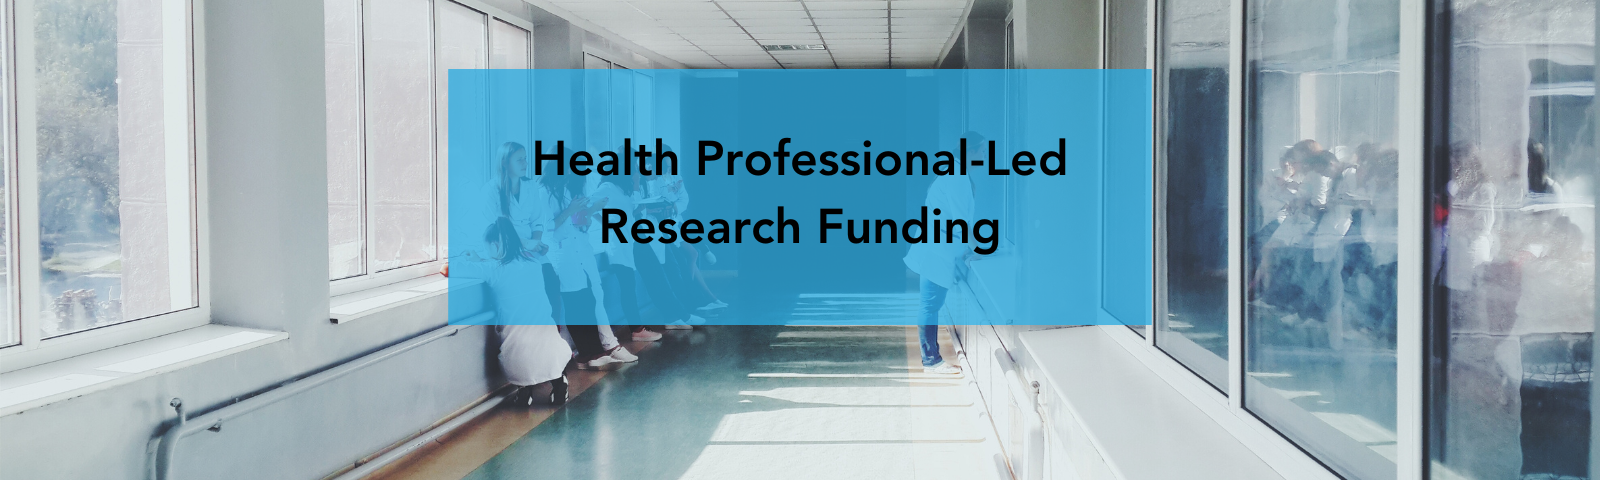 Image of health professionals in a hospital setting. Health professional-led research funding. NL SUPPORT logo.